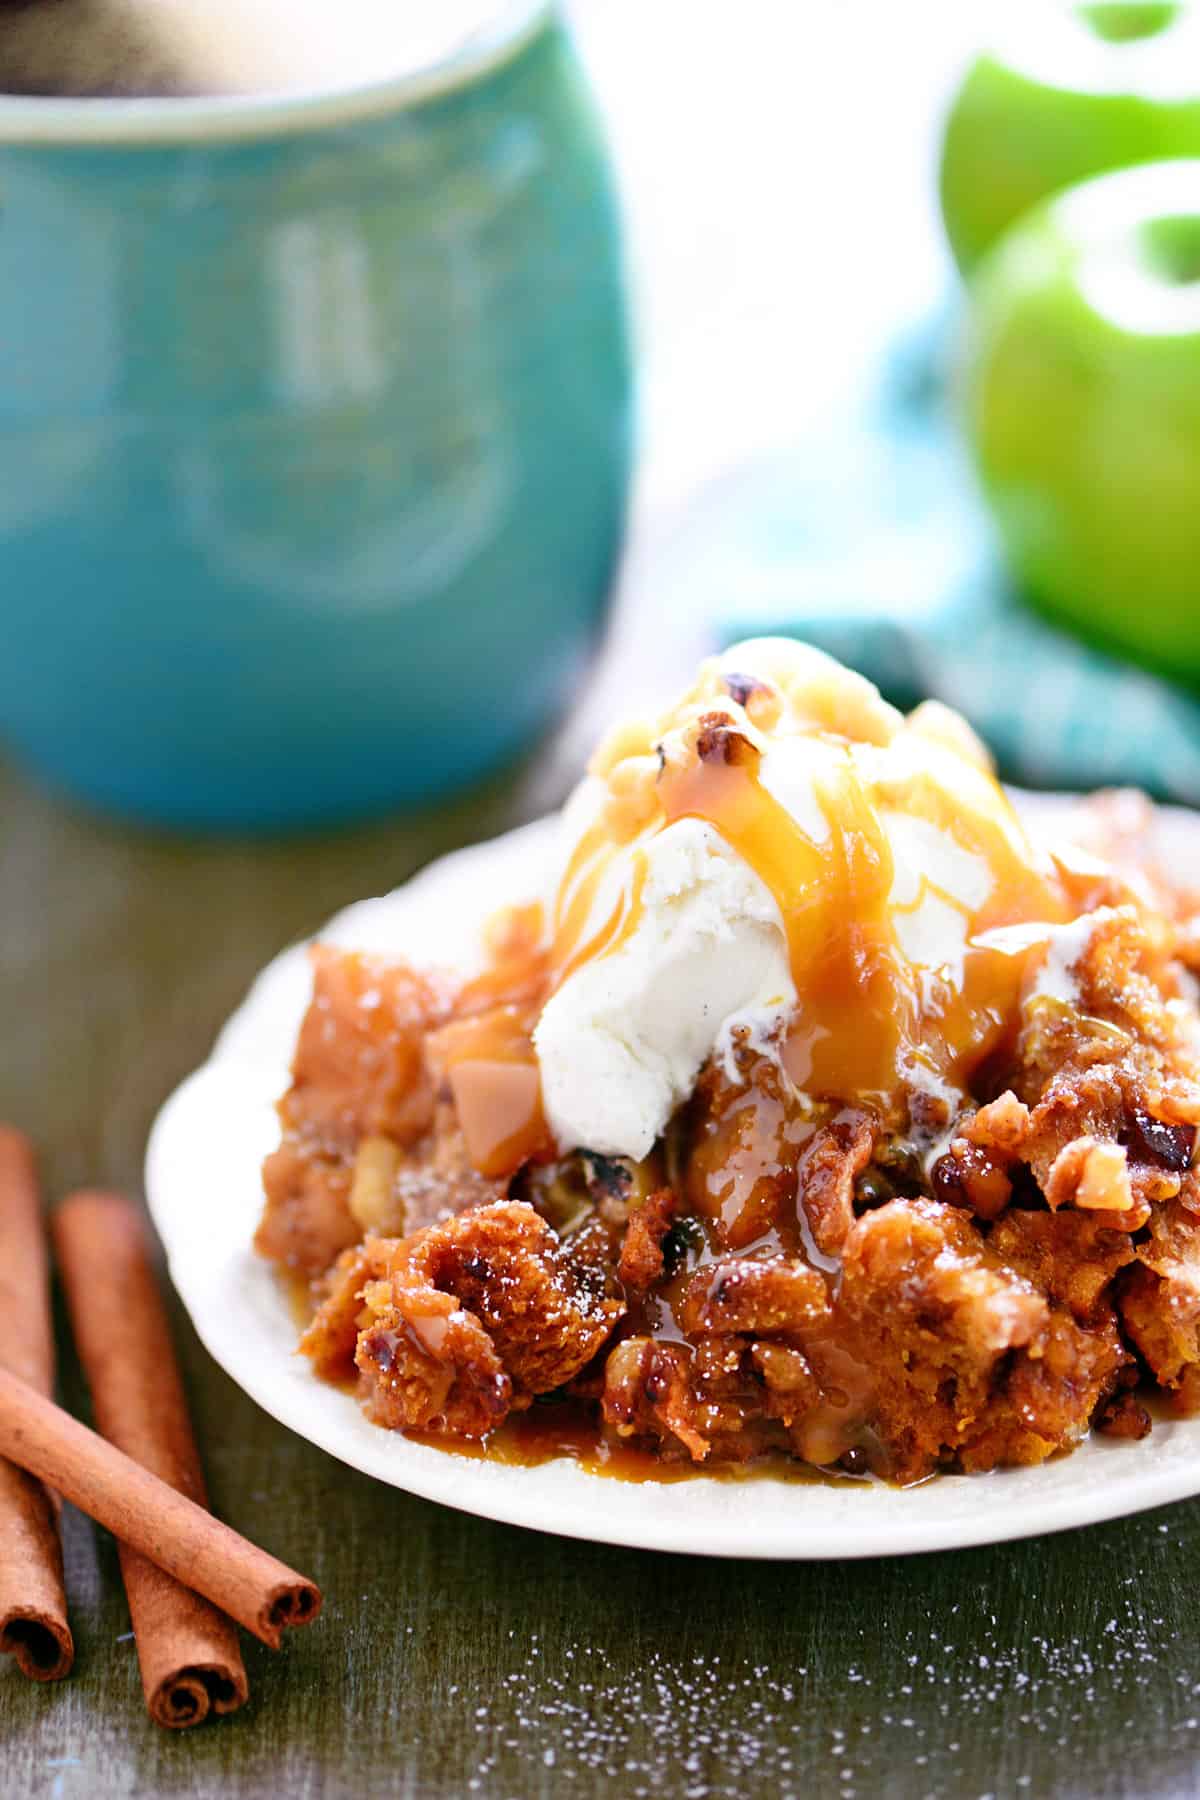 Apple bread pudding with ice cream and caramel on top.